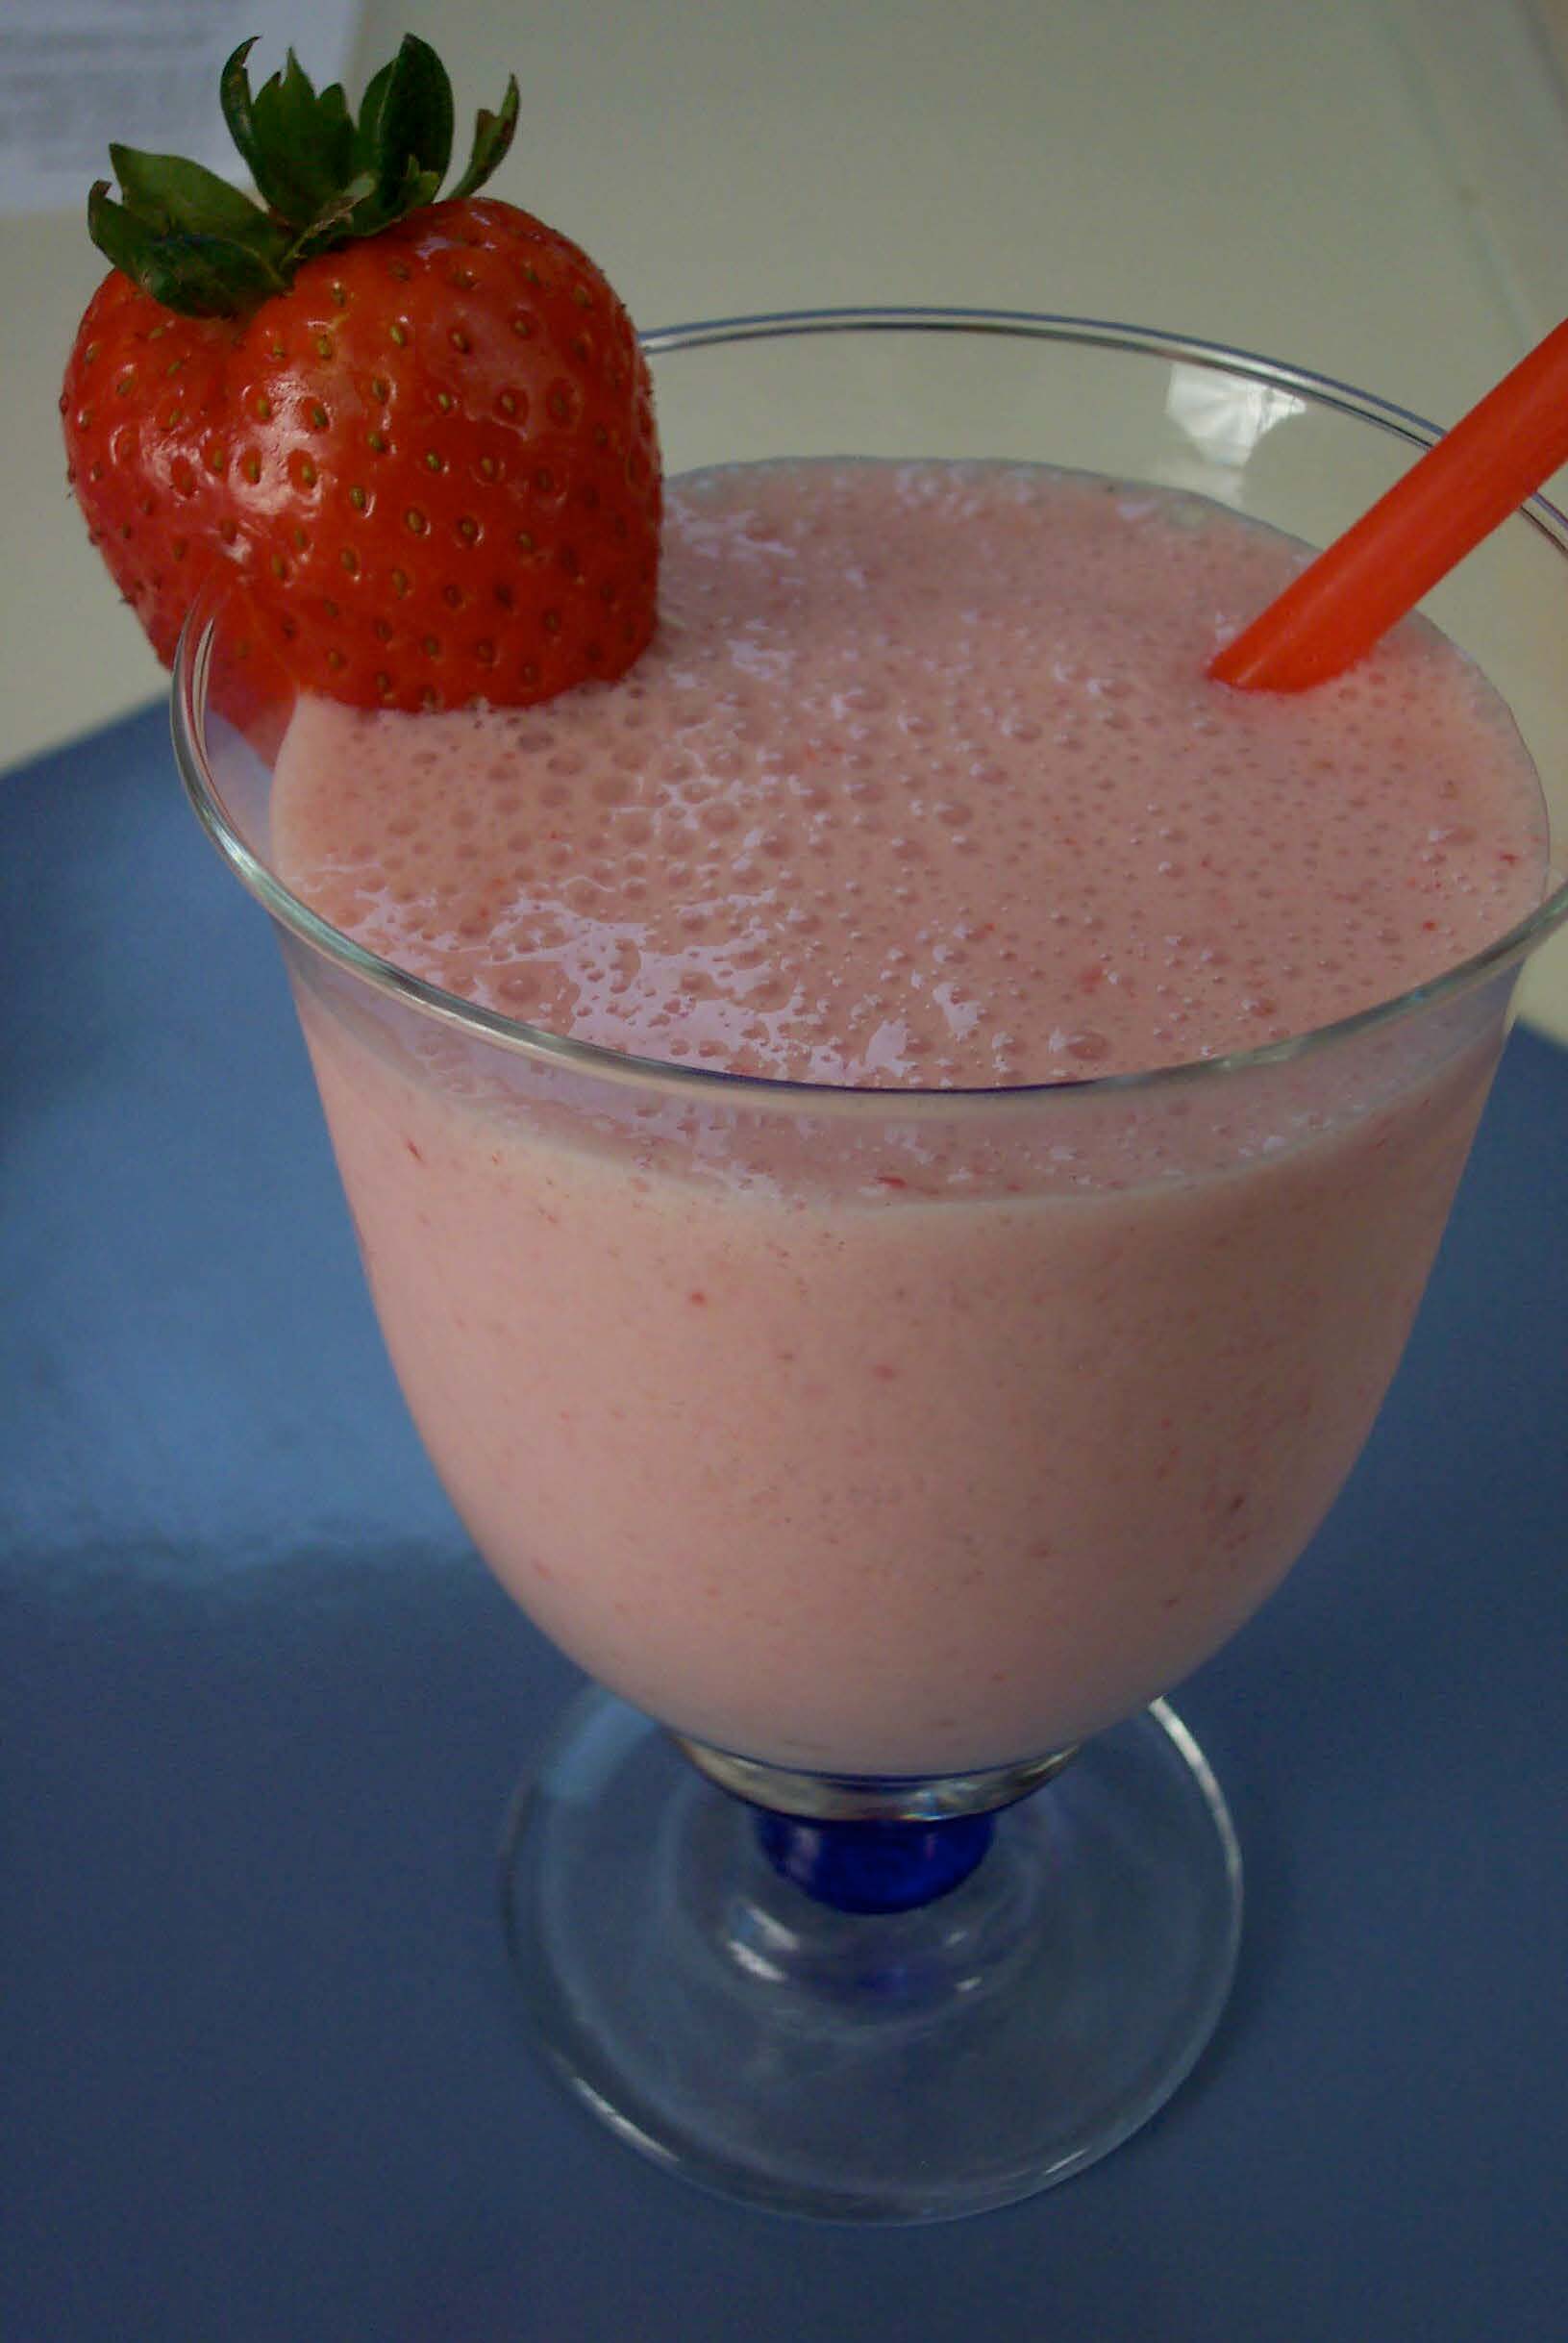 A pink looking smoothie in a clear glass with a strawberry on the rim.